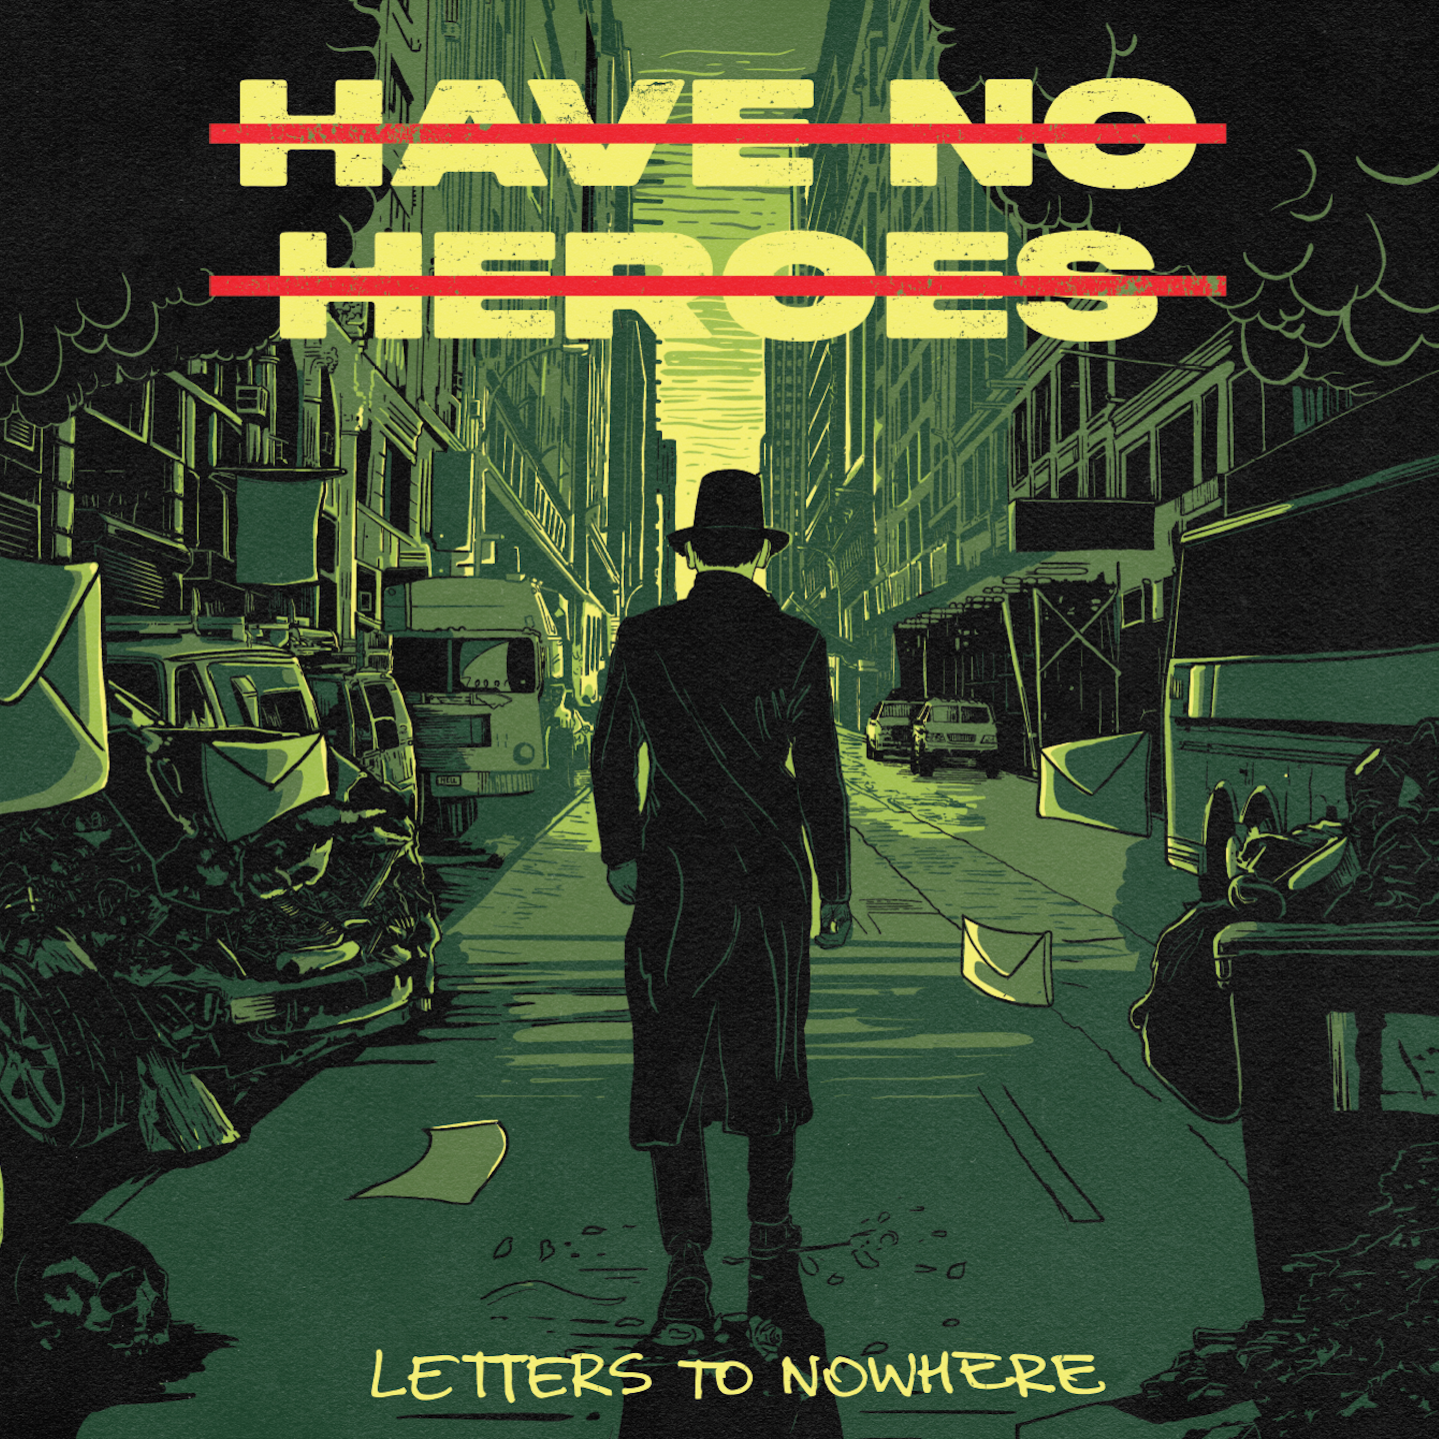 Letters To Nowhere